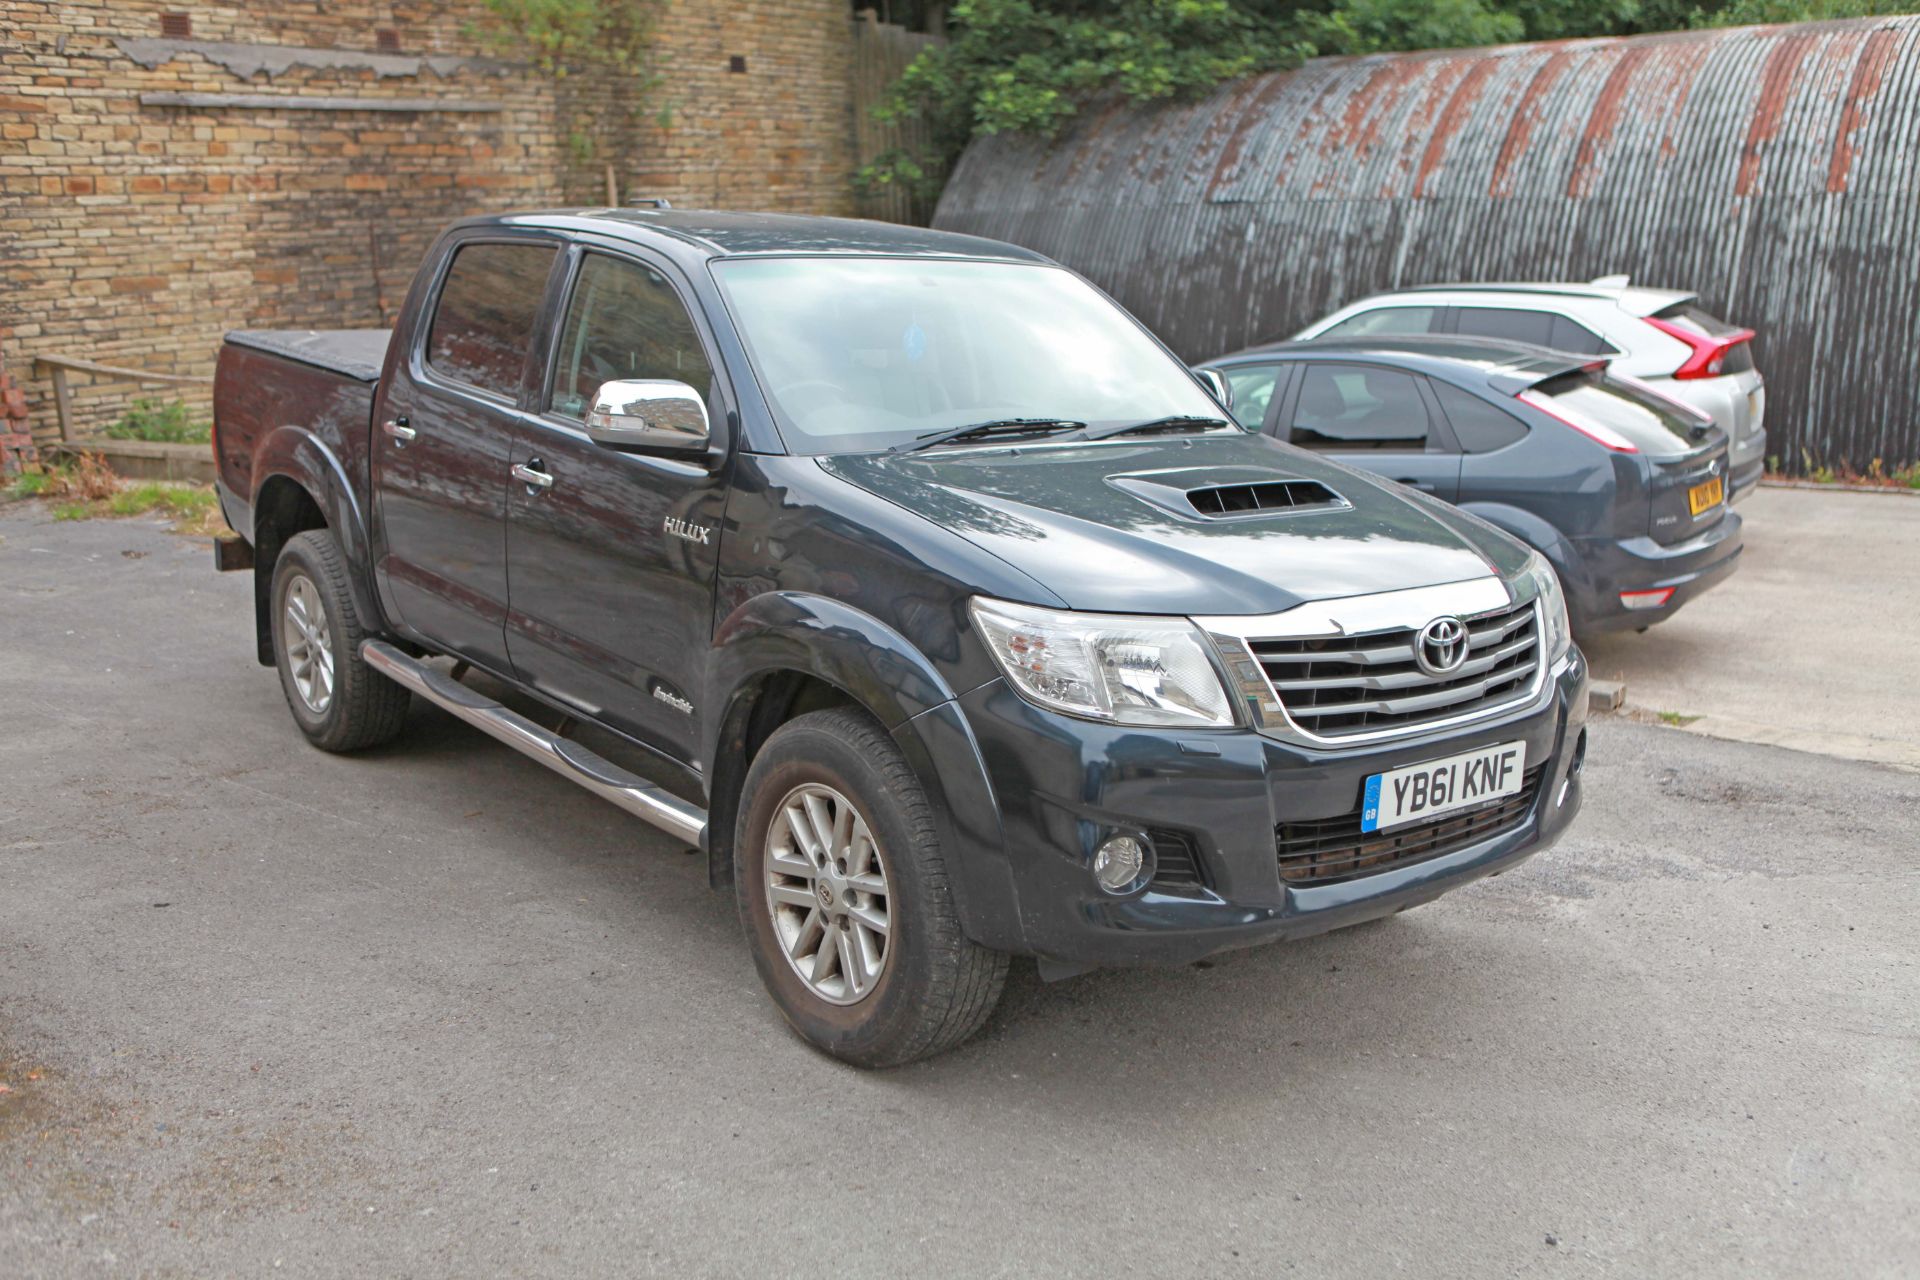 Toyota Hilux DC30 Double Cab Pick up YB61 KNF